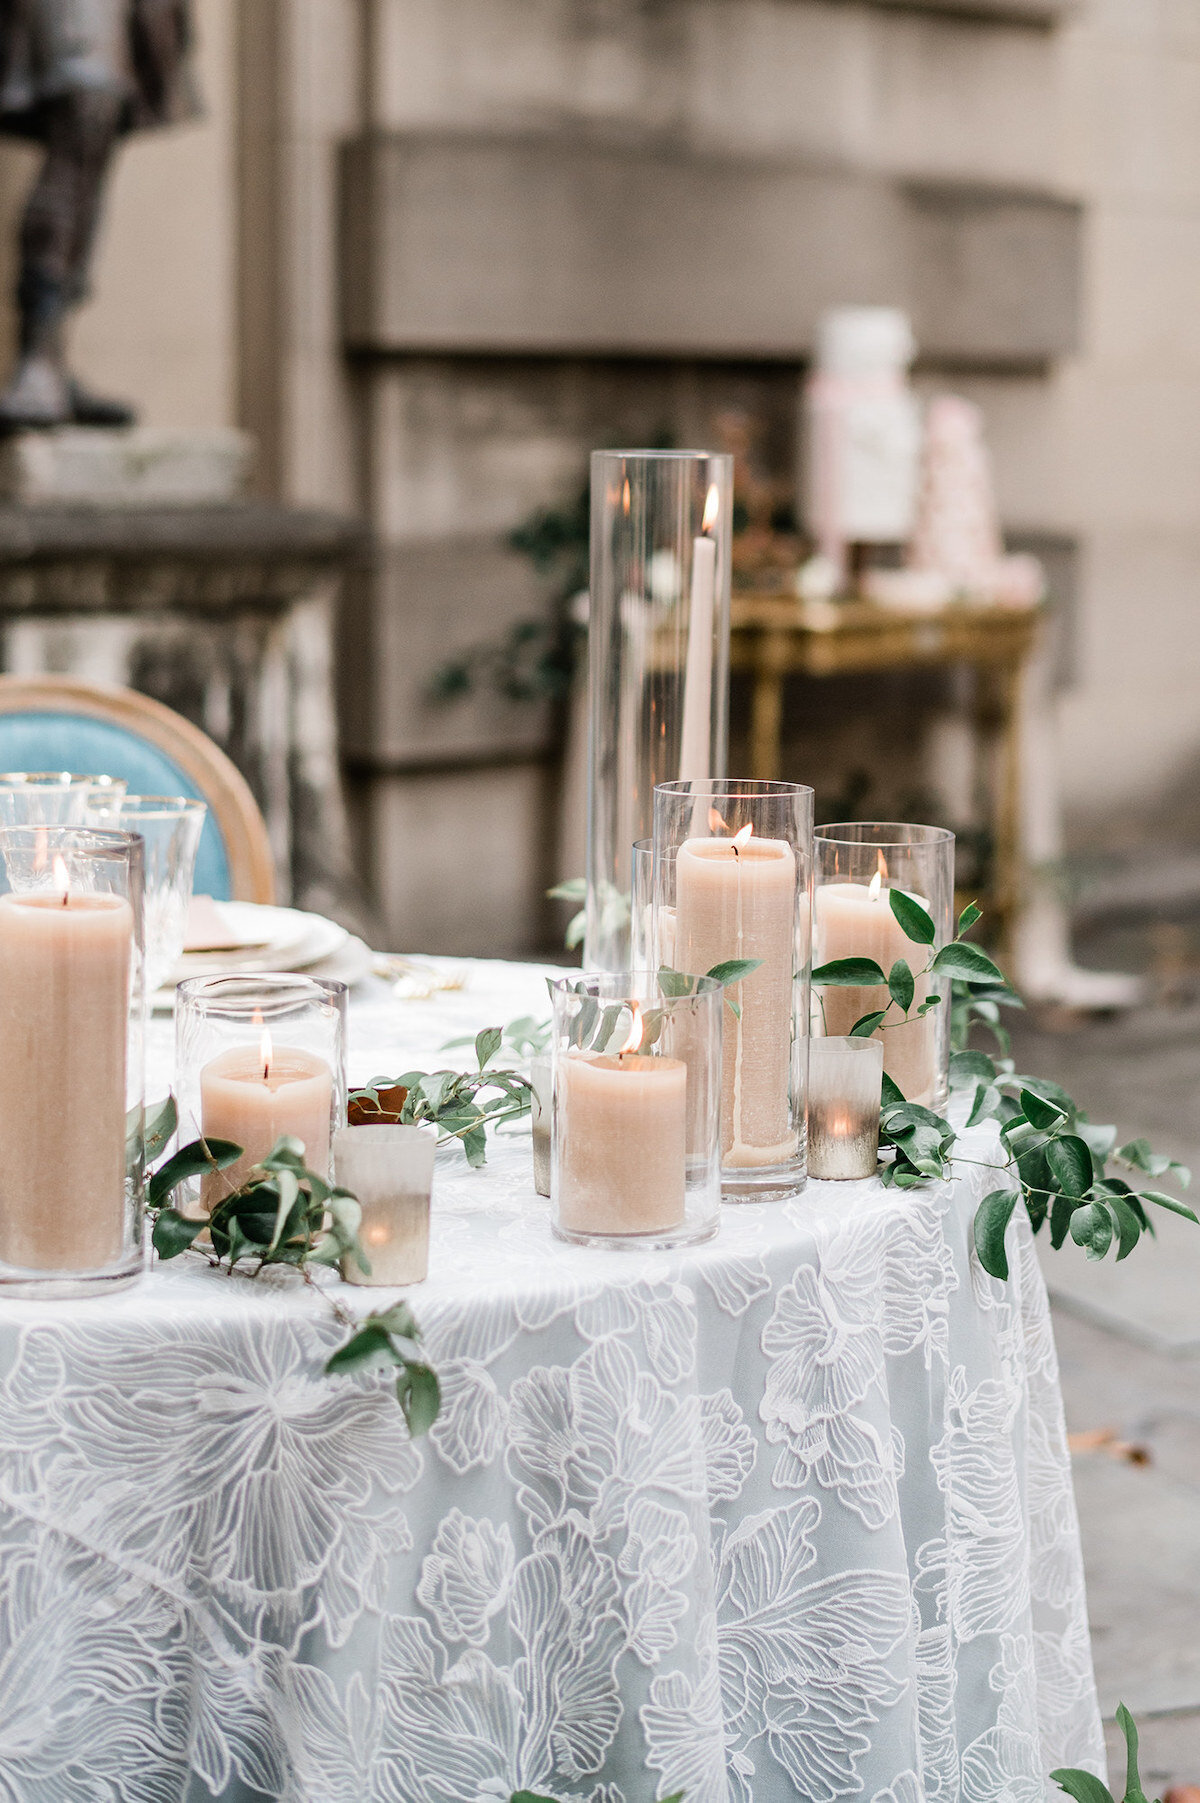 Crafting moments that read like a visual sonnet, our luxury weddings in DC blend romance and artistry. Experience your special day through a fine art lens, capturing The Larz Anderson House's splendor.